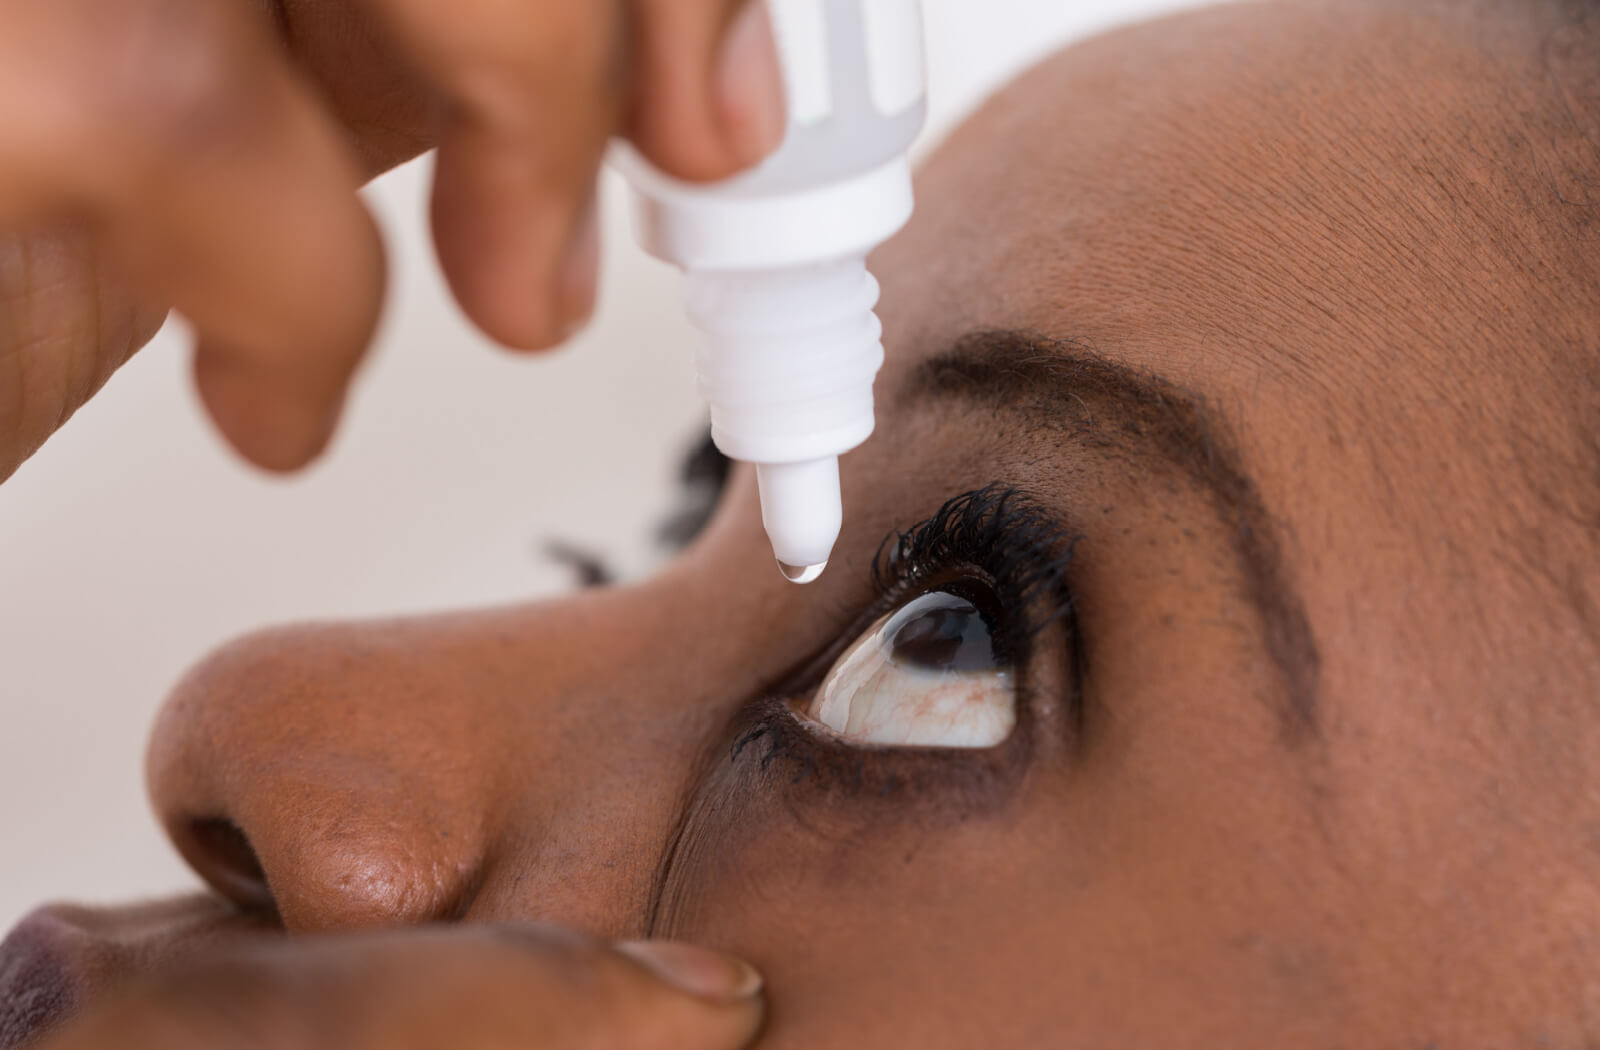 A close-up of a woman using artificial eyedrops on her left eye.